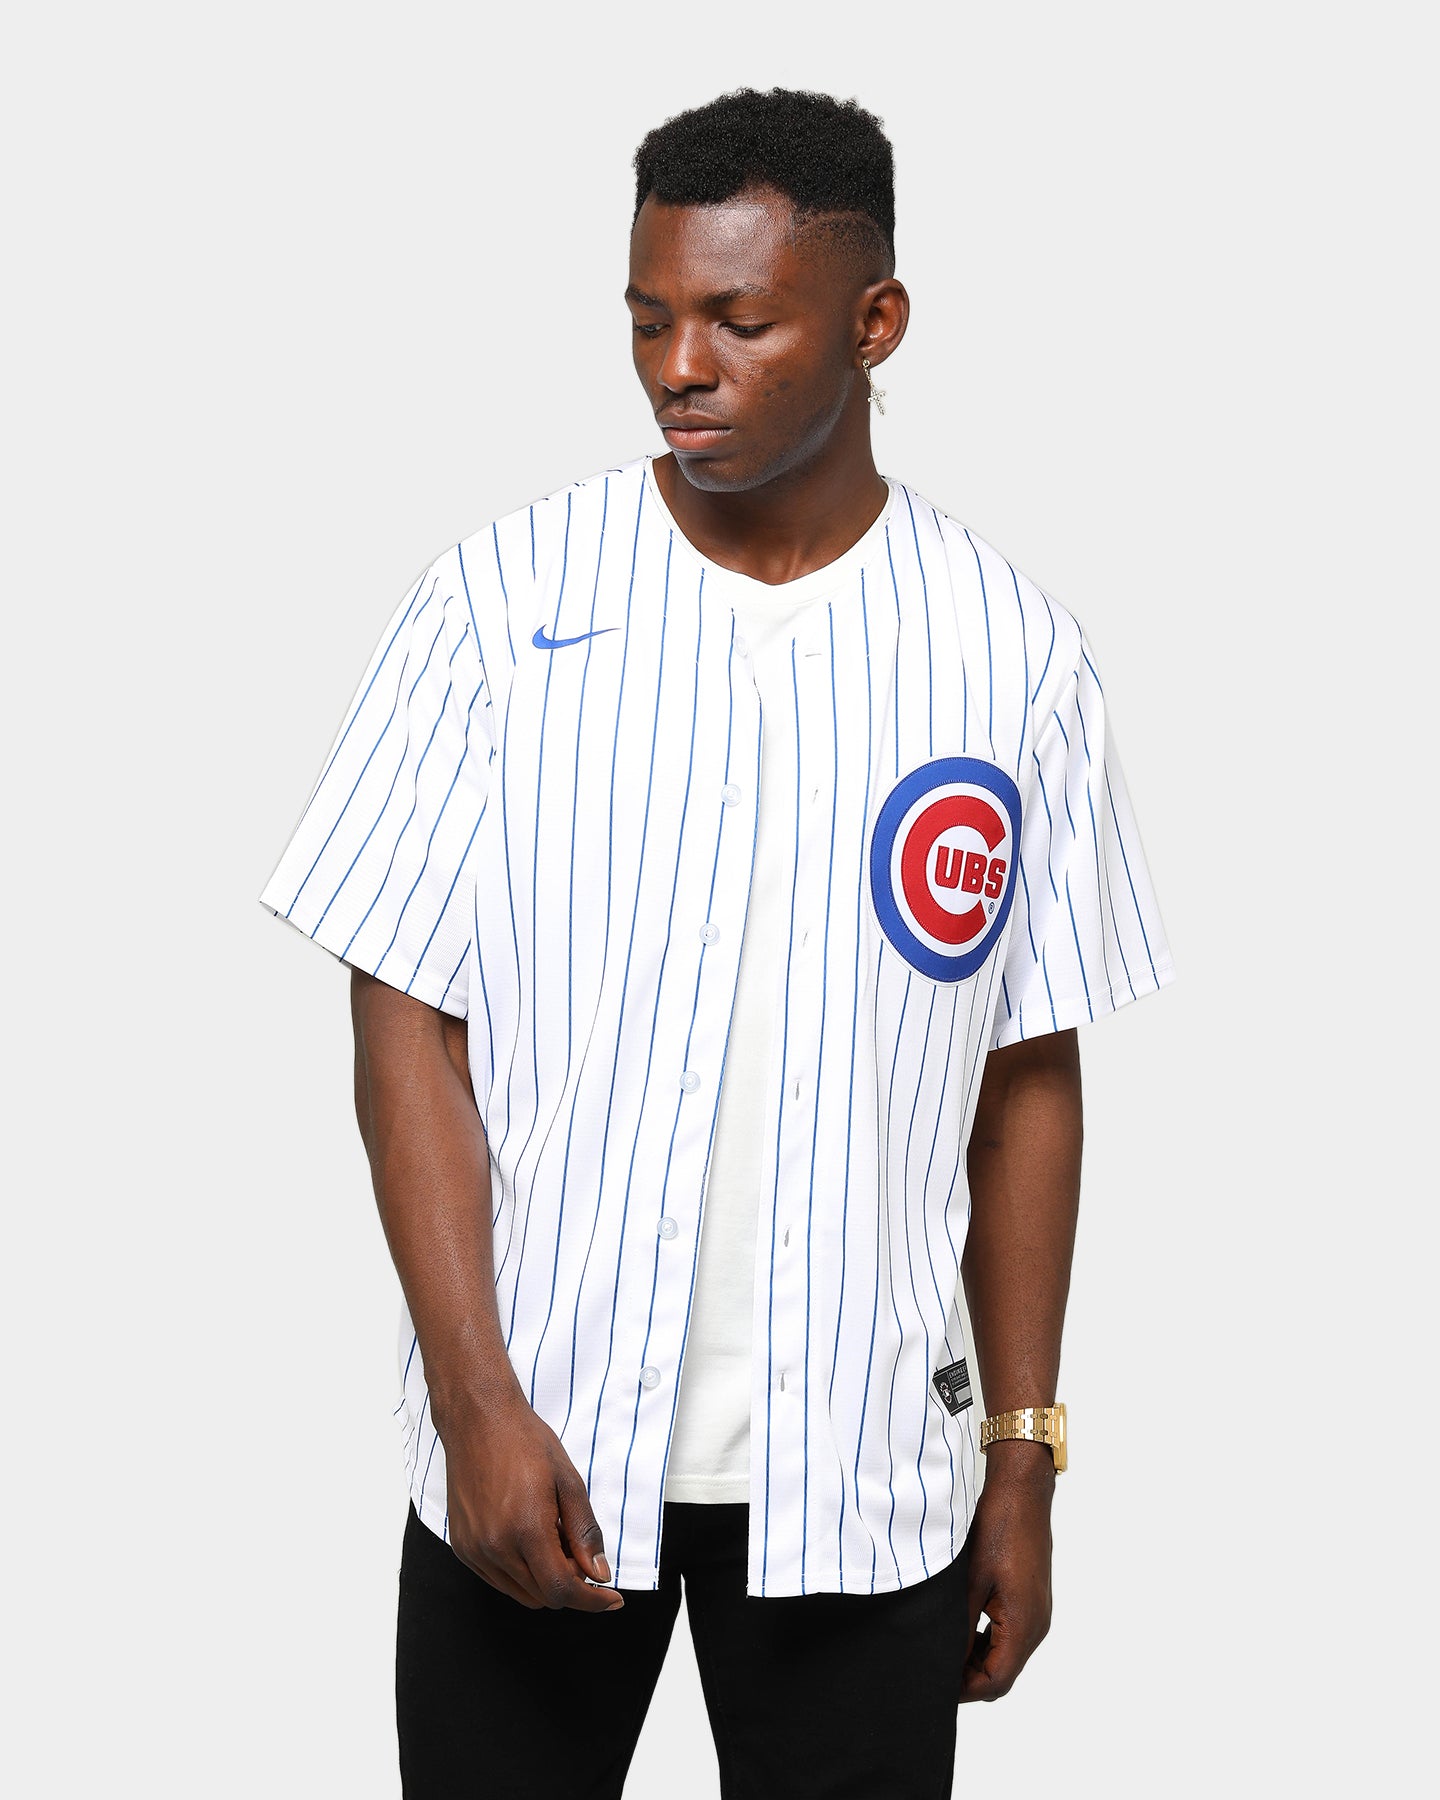 cubs jersey sizing